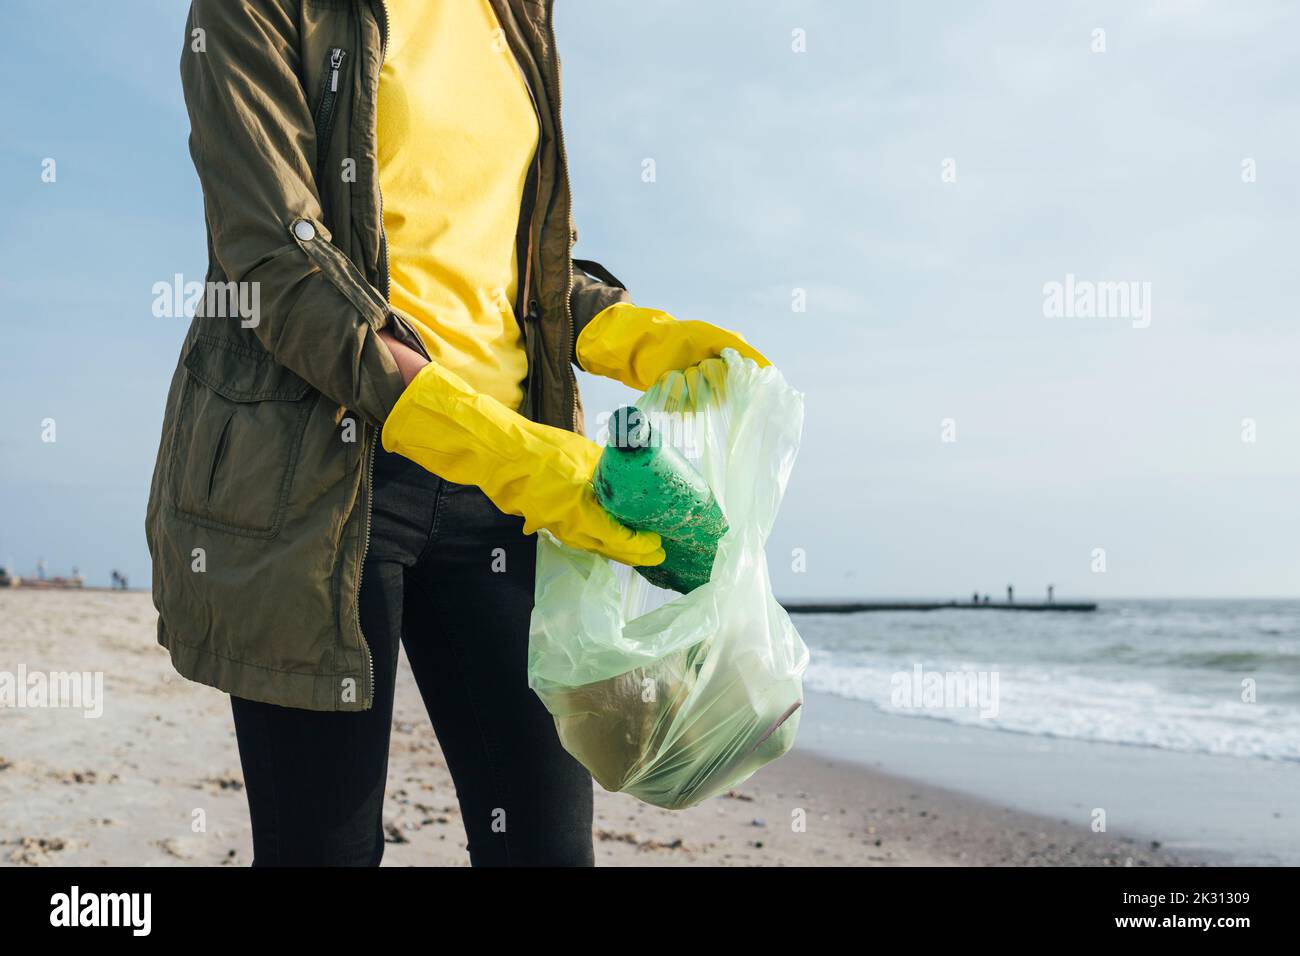 Woman wearing gloves collecting waste plastic bottles in garbage bag Stock Photo